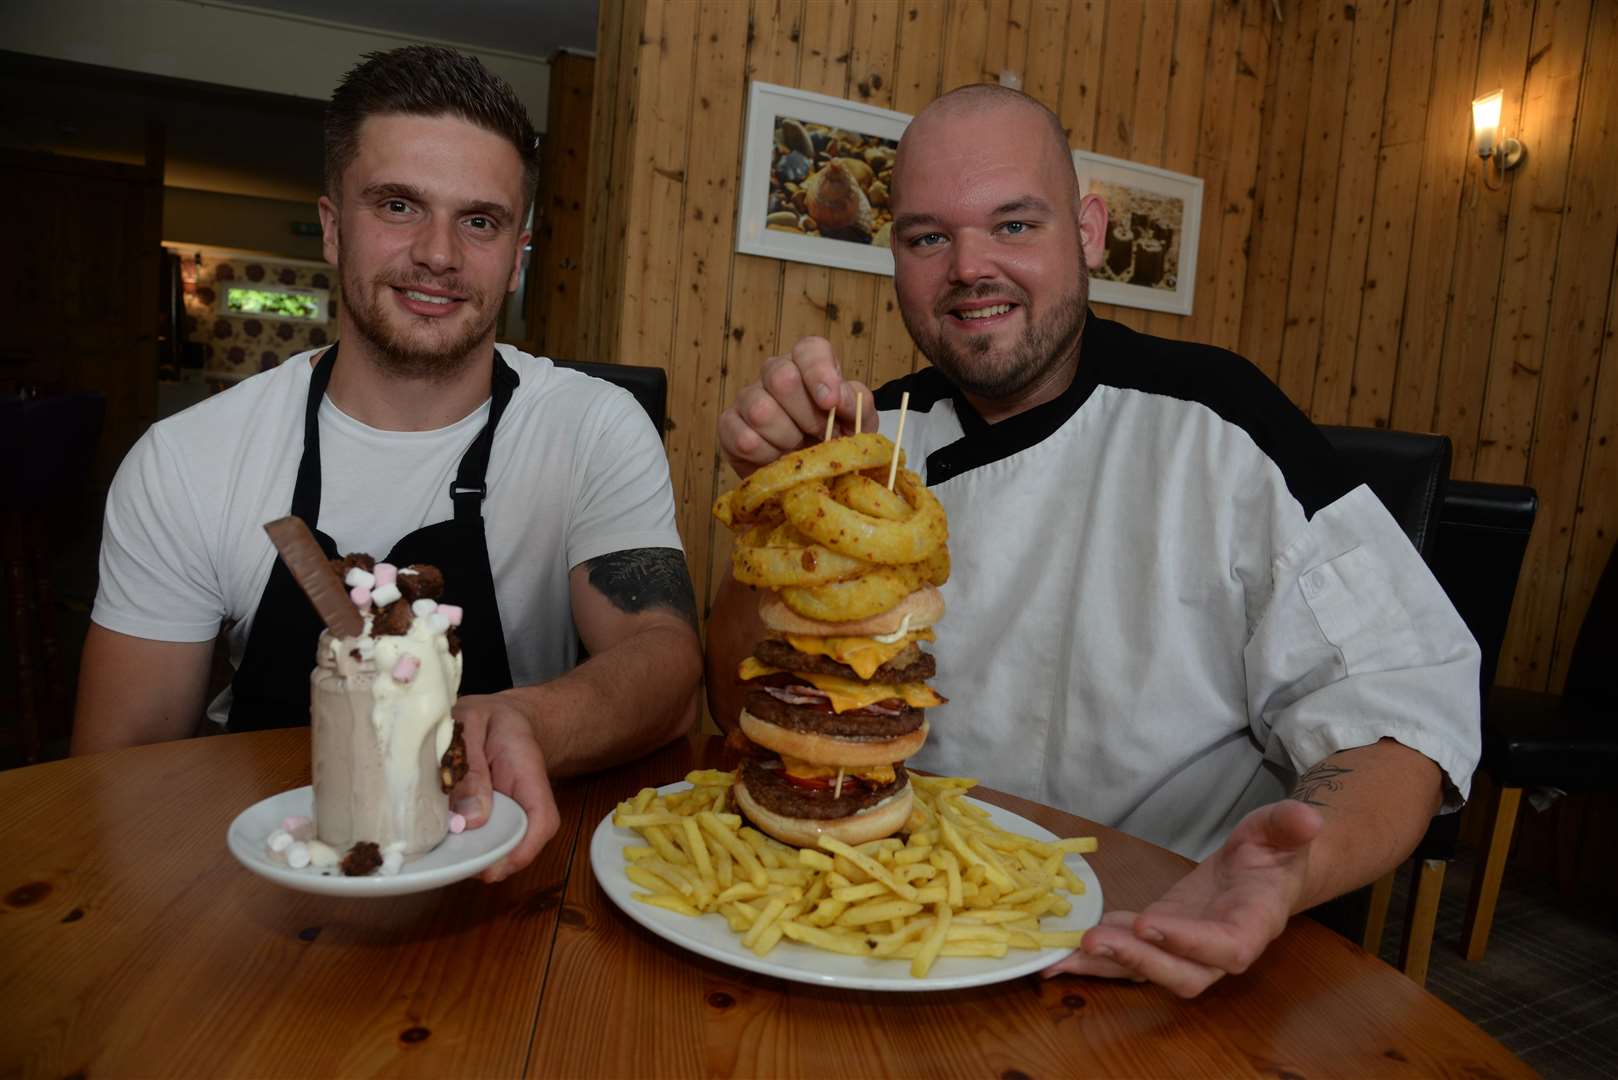 Chefs Roger Heathcote and David Waddington with their creation at the Rising Sun, Beltinge